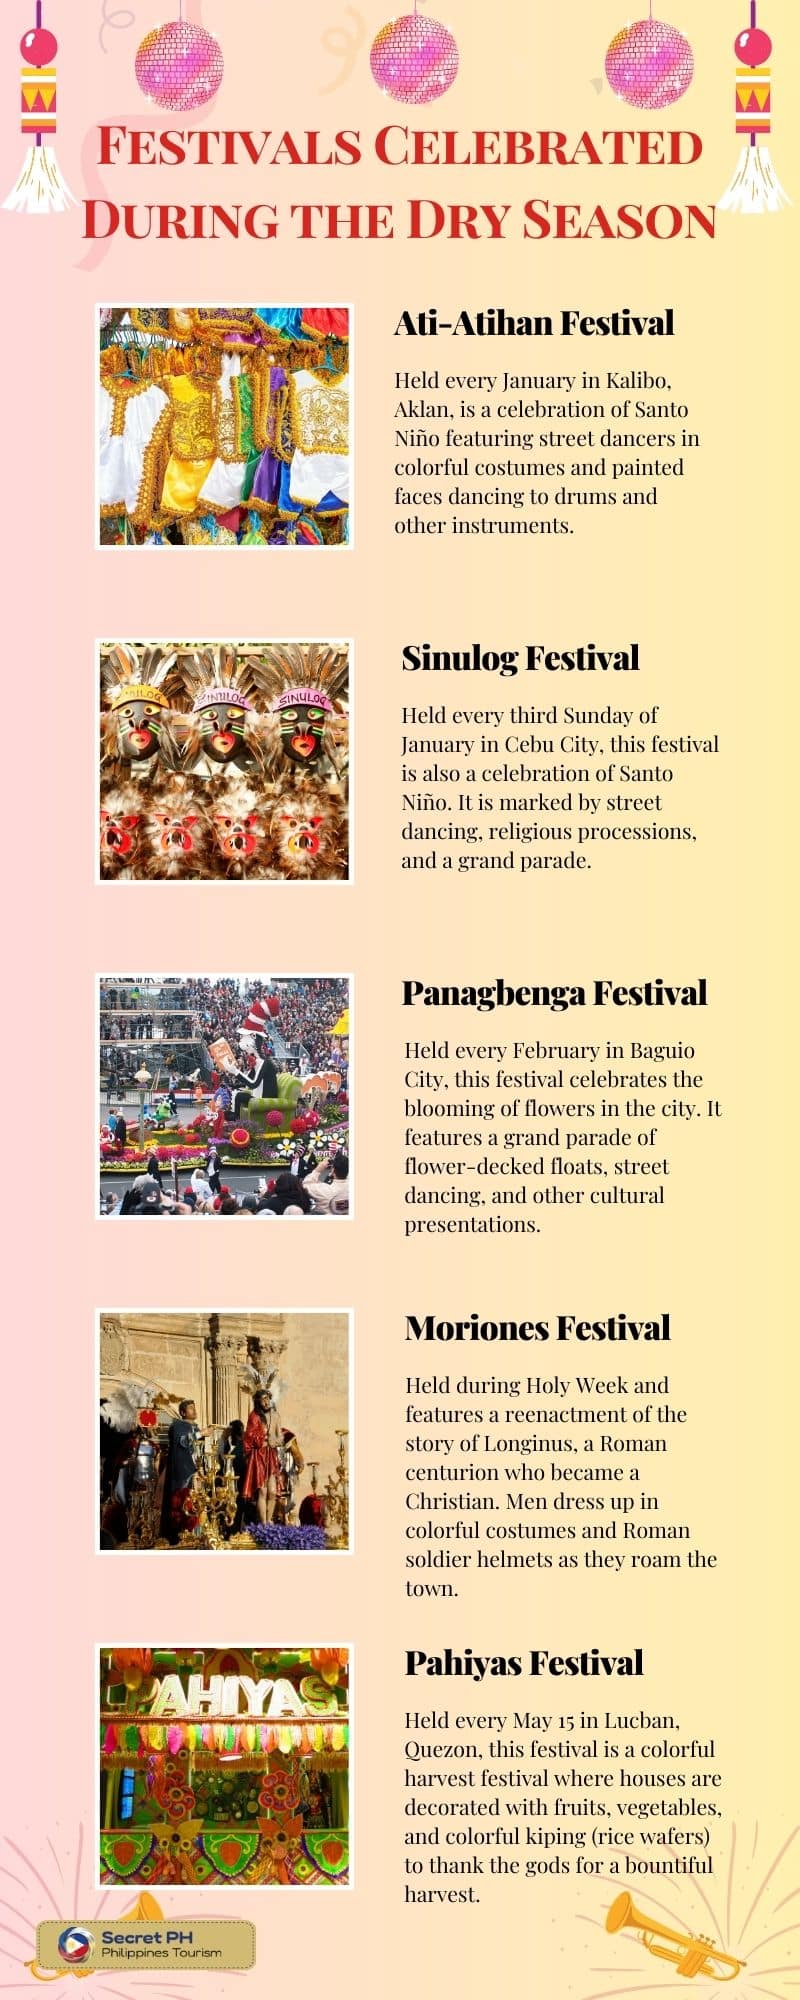 Festivals Celebrated During the Dry Season